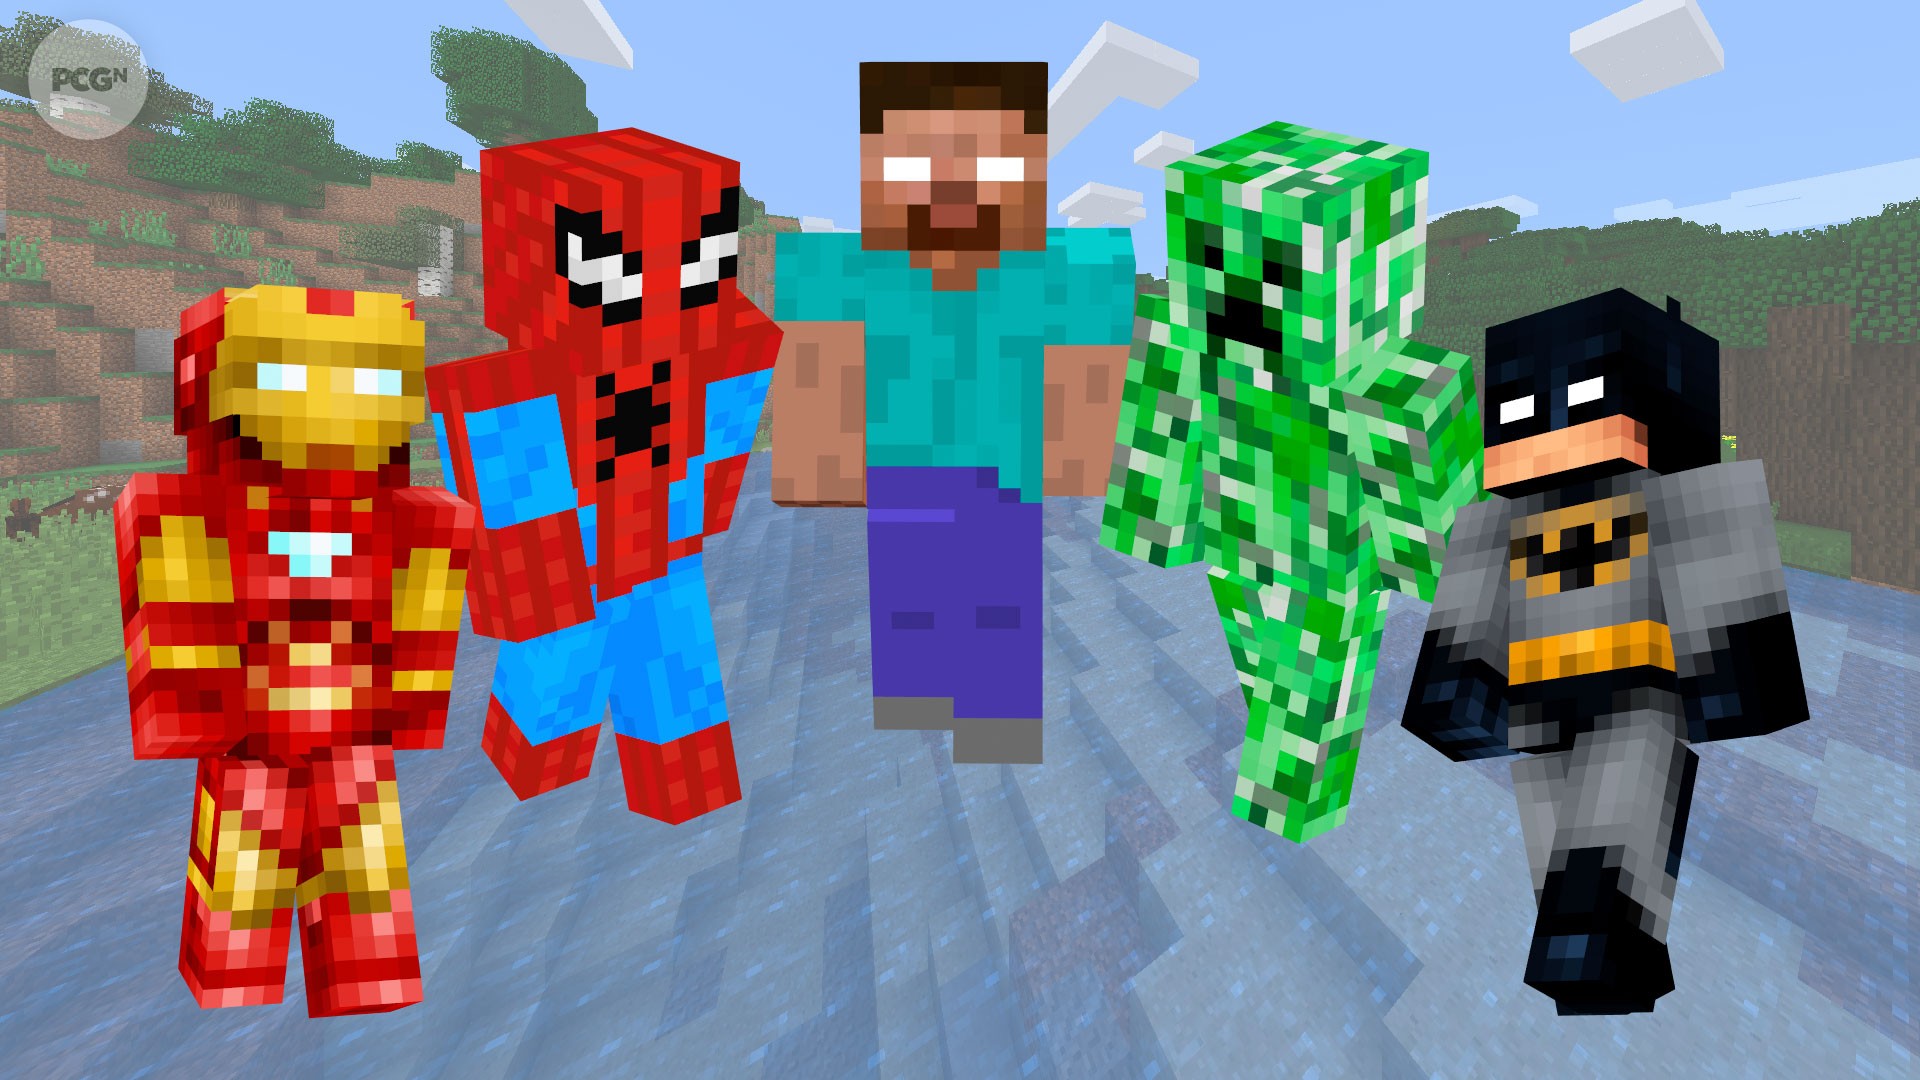 Cool Minecraft skins to obtain in your avatar